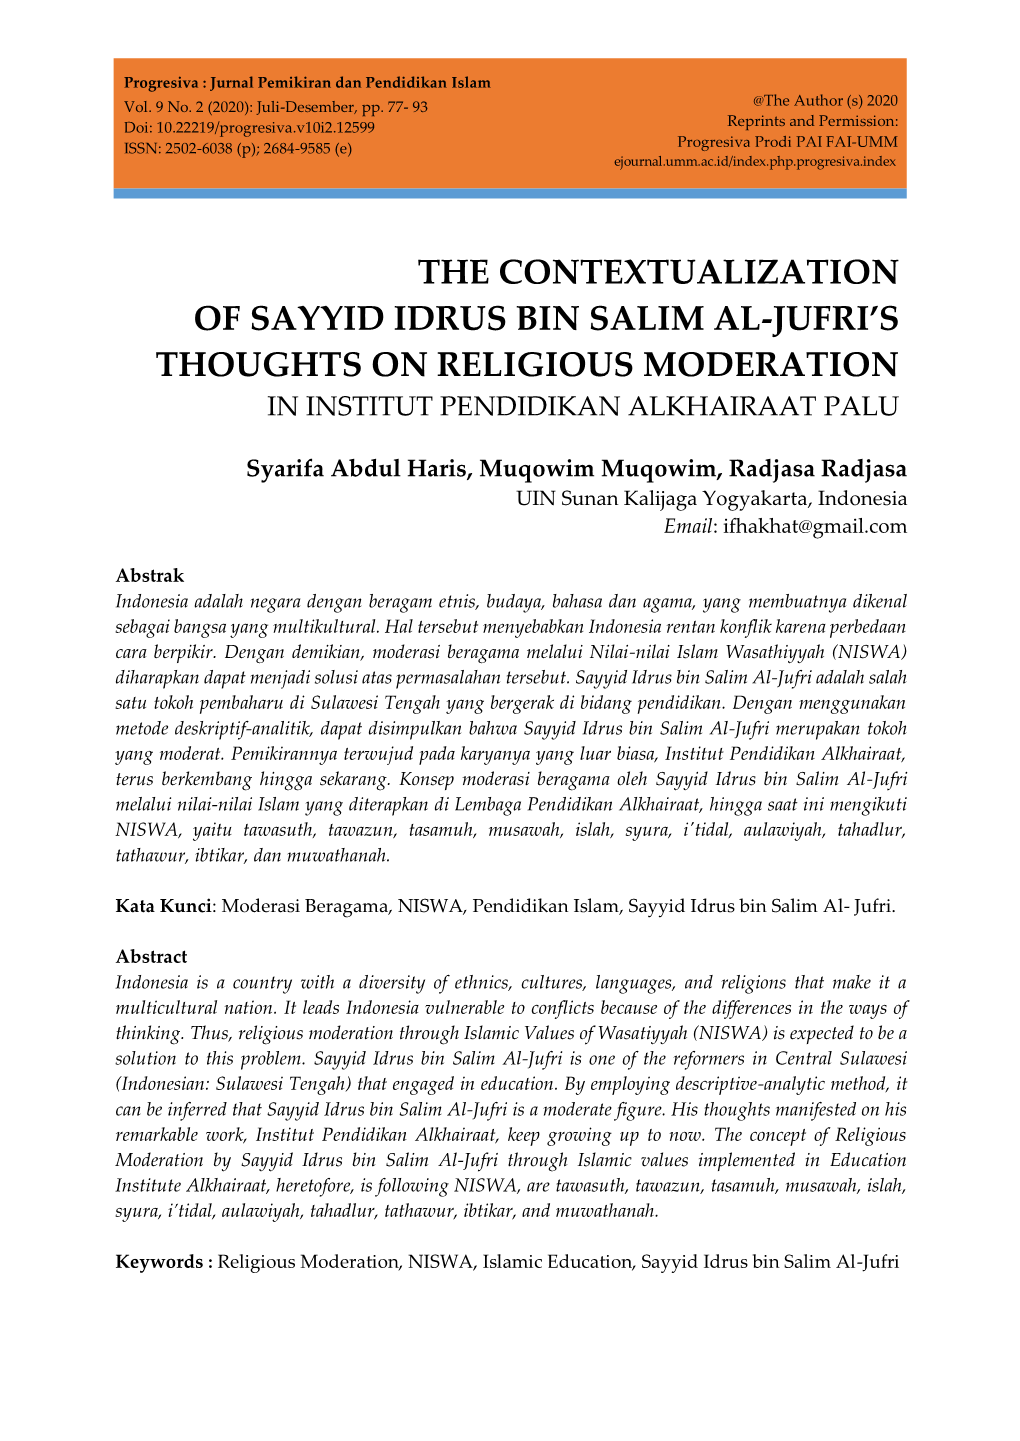 The Contextualization of Sayyid Idrus Bin Salim Al-Jufri's Thoughts on Religious Moderation